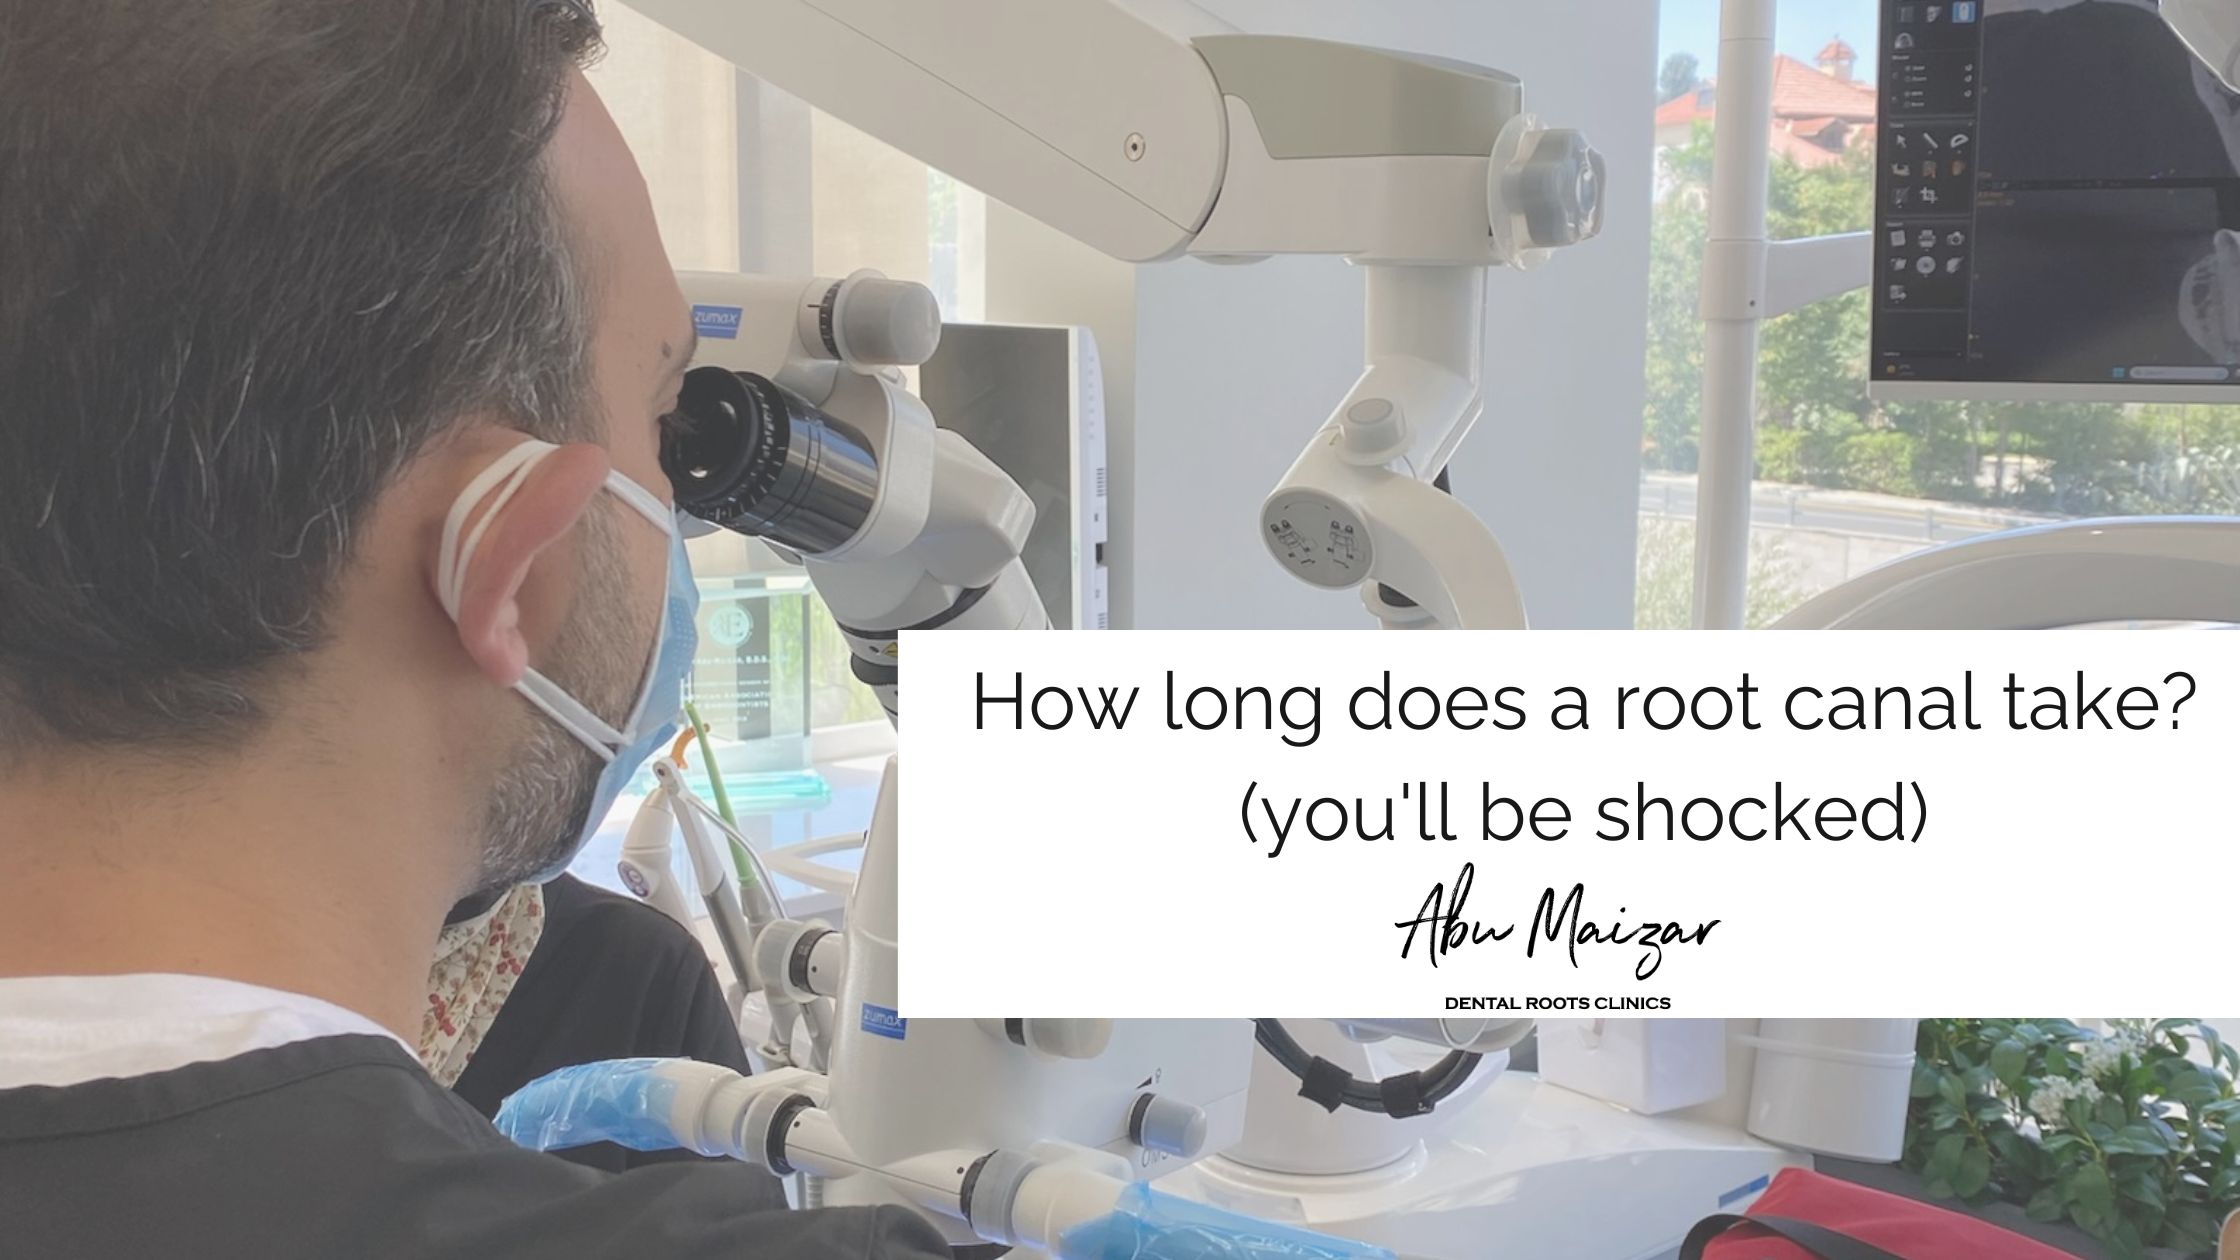 How long does a root canal take?(you'll be shocked)